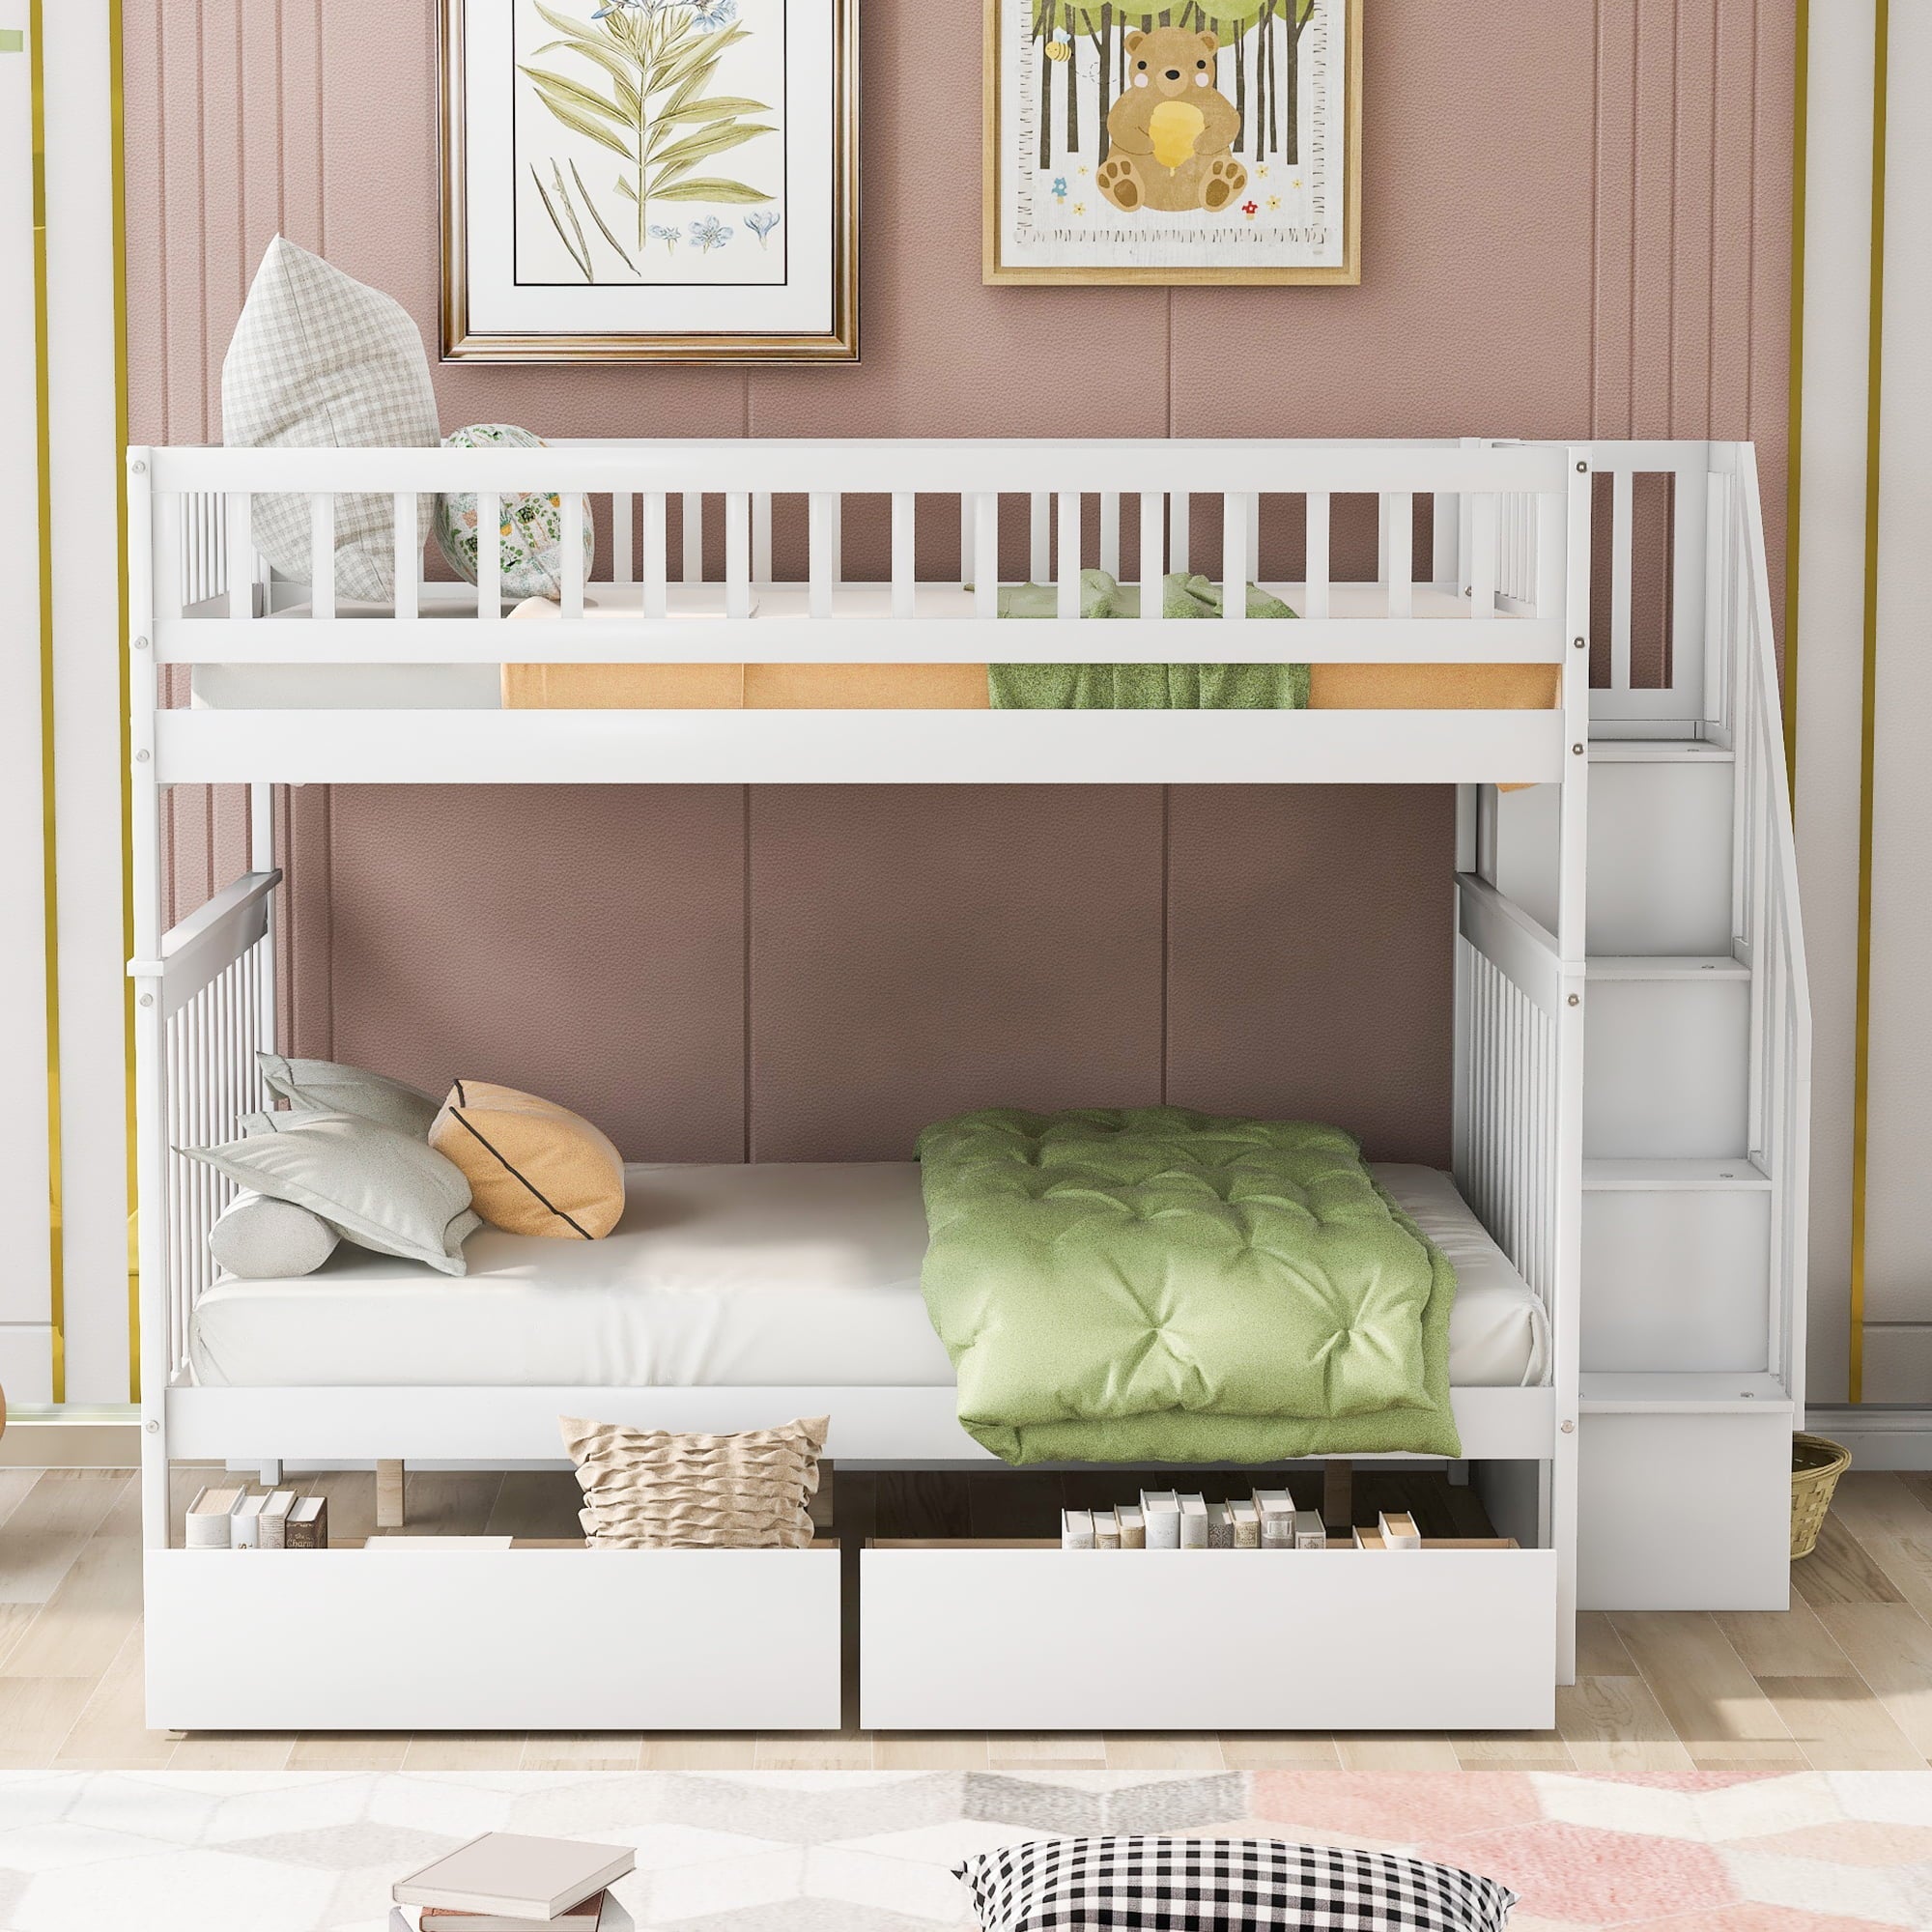 Euroco Full Over Full Bunk Bed with Storage Shelves and Drawers for Kid's Room